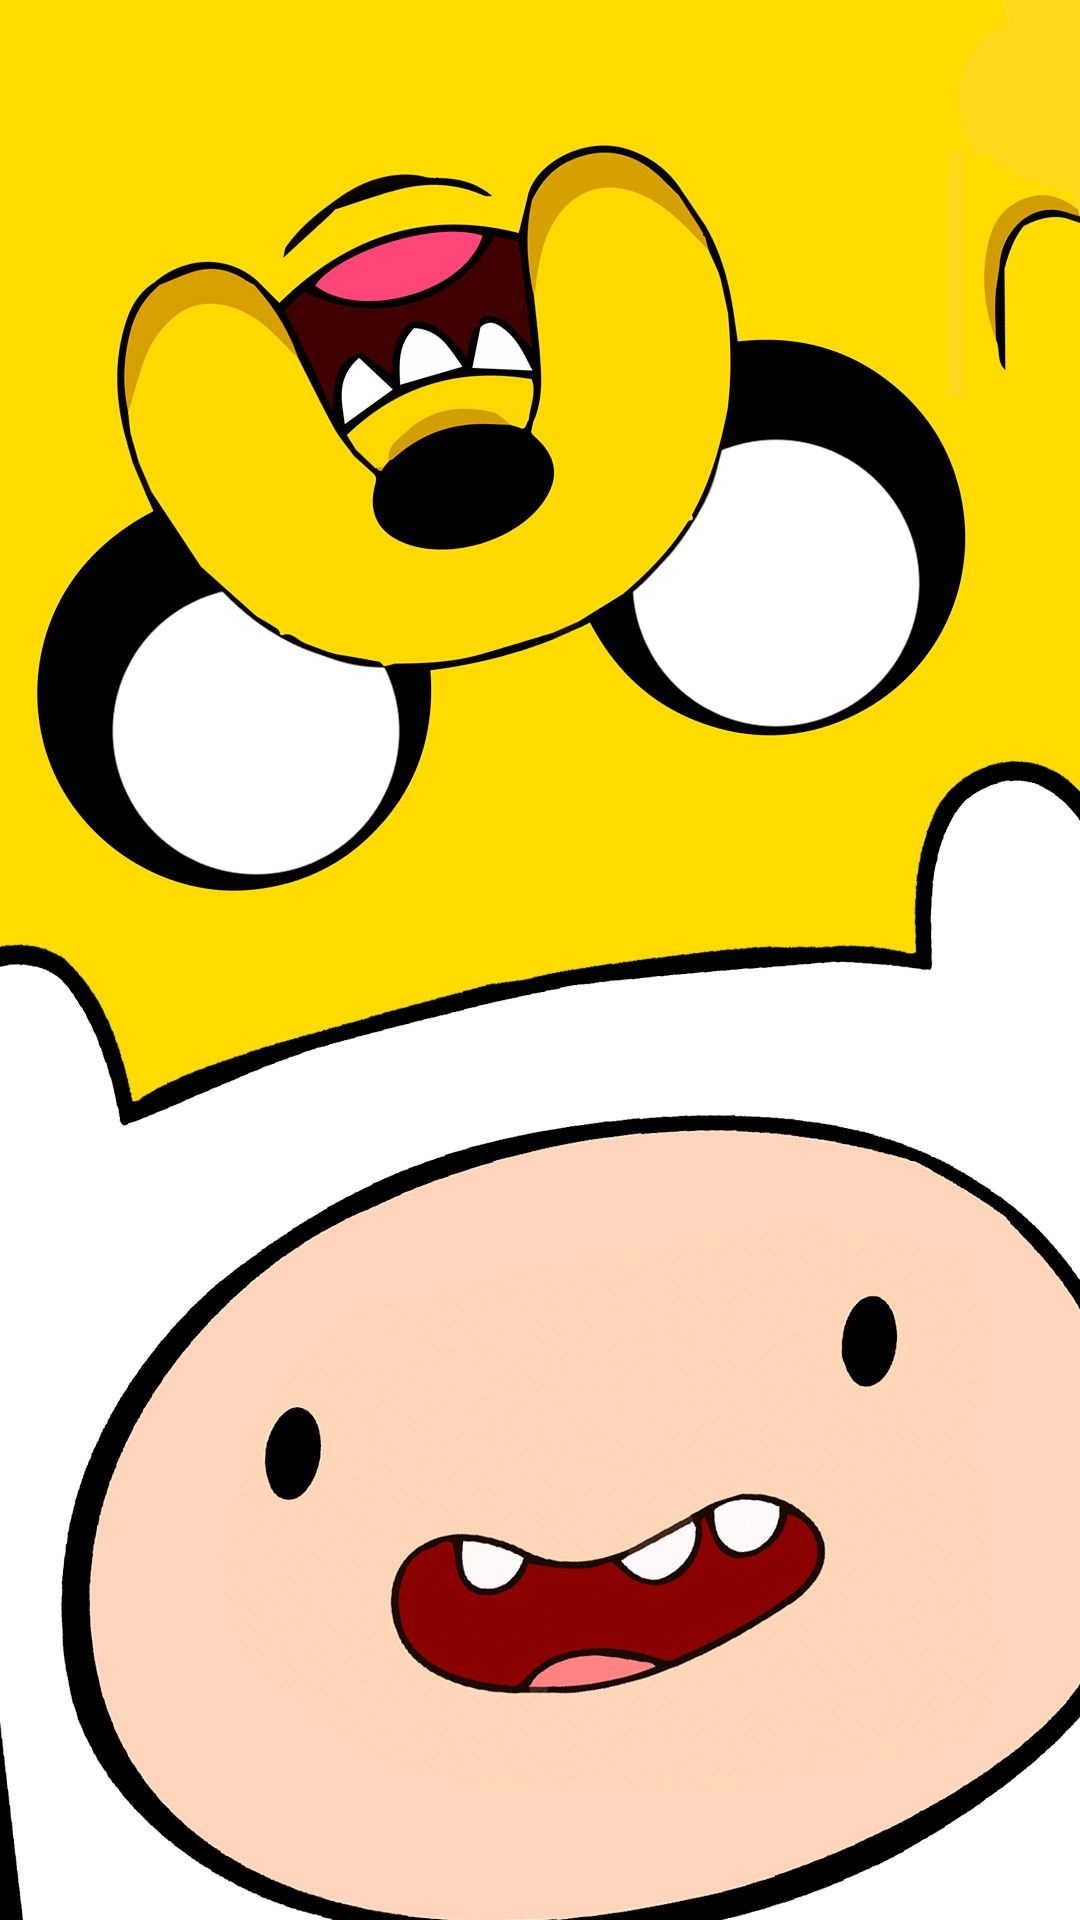 Finn and Jake wallpapers, Cartoon characters, Adventure Time backgrounds, Animated series, 1080x1920 Full HD Handy